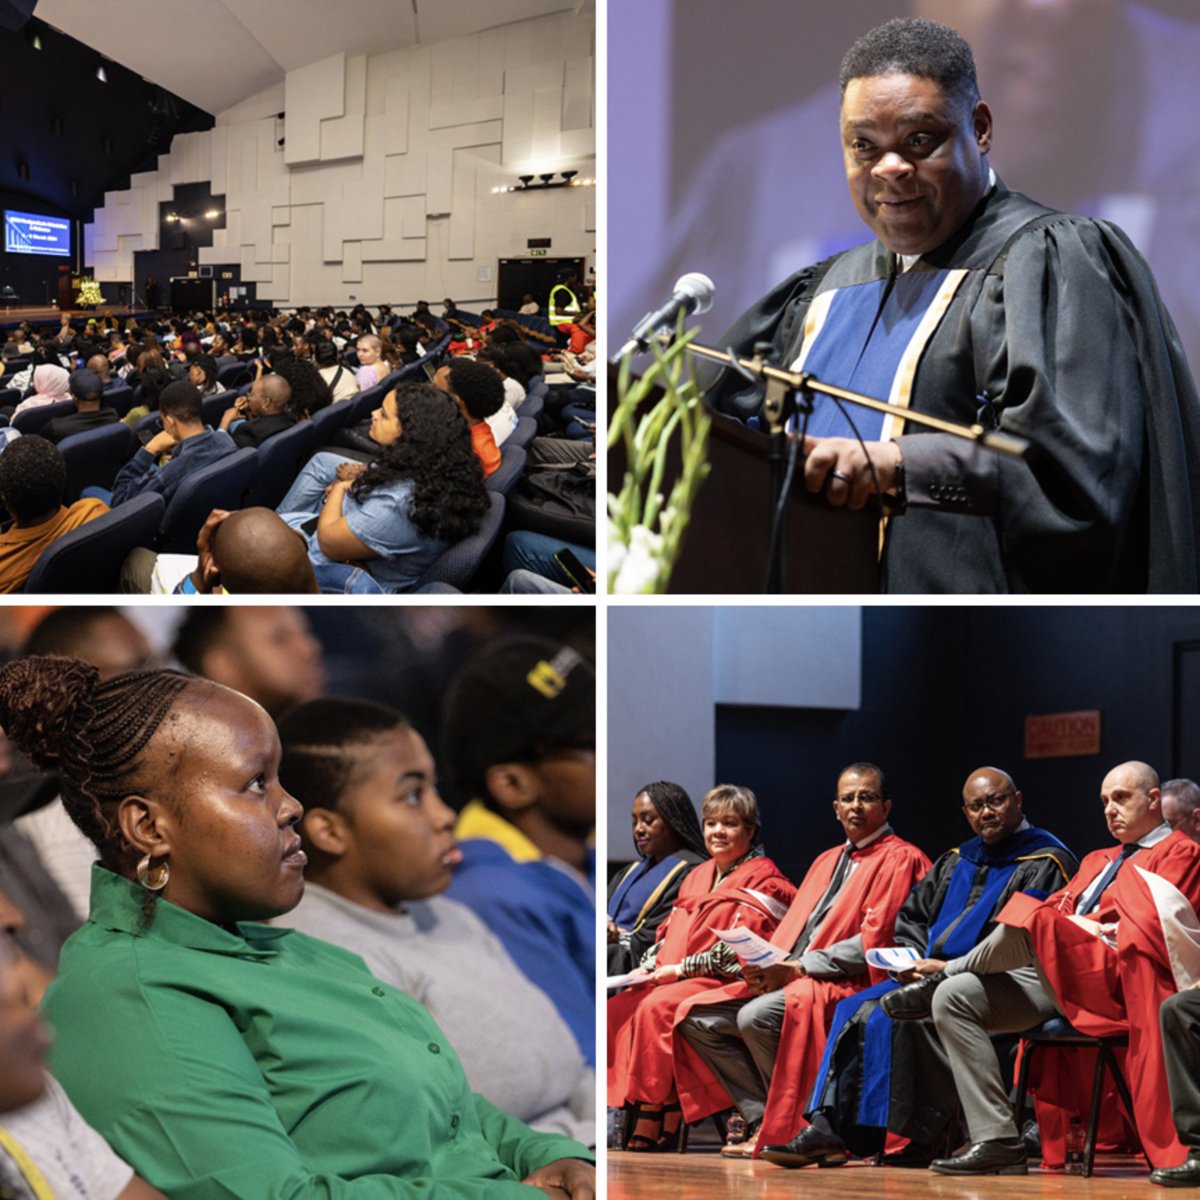 Wits welcomed 12 000 future researchers. Jerome September, the Dean of Student Affairs, offered valuable guidance to postgraduate students, urging them to take charge of their academic journey. Read More: shorturl.at/oHVW1 #WitsForGood #WitsNews #WitsUniversity